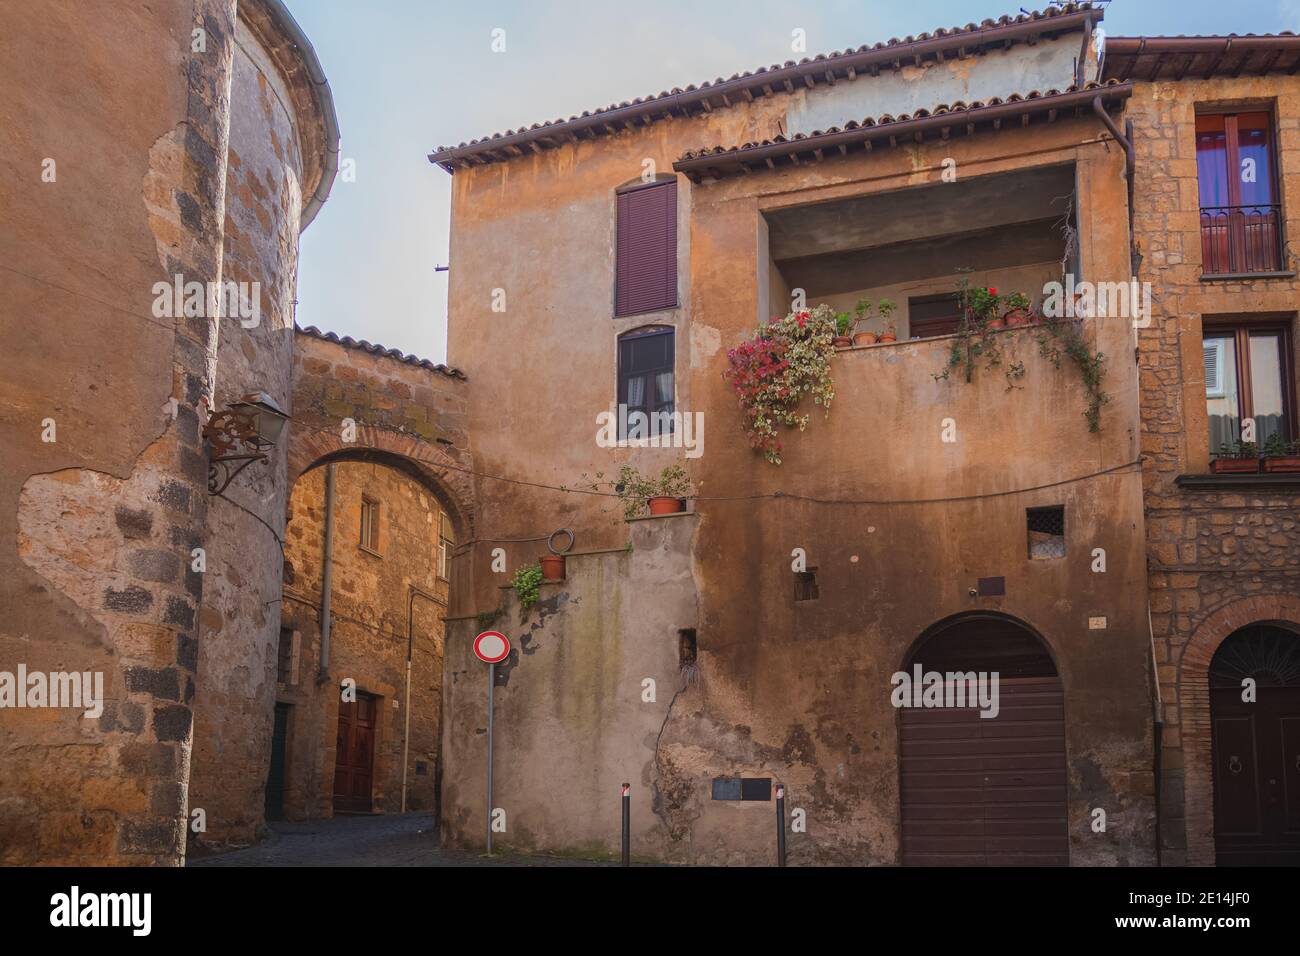 A charming old town home in the Etruscan hilltop village of Orvieto, Umbria in Italy. Stock Photo